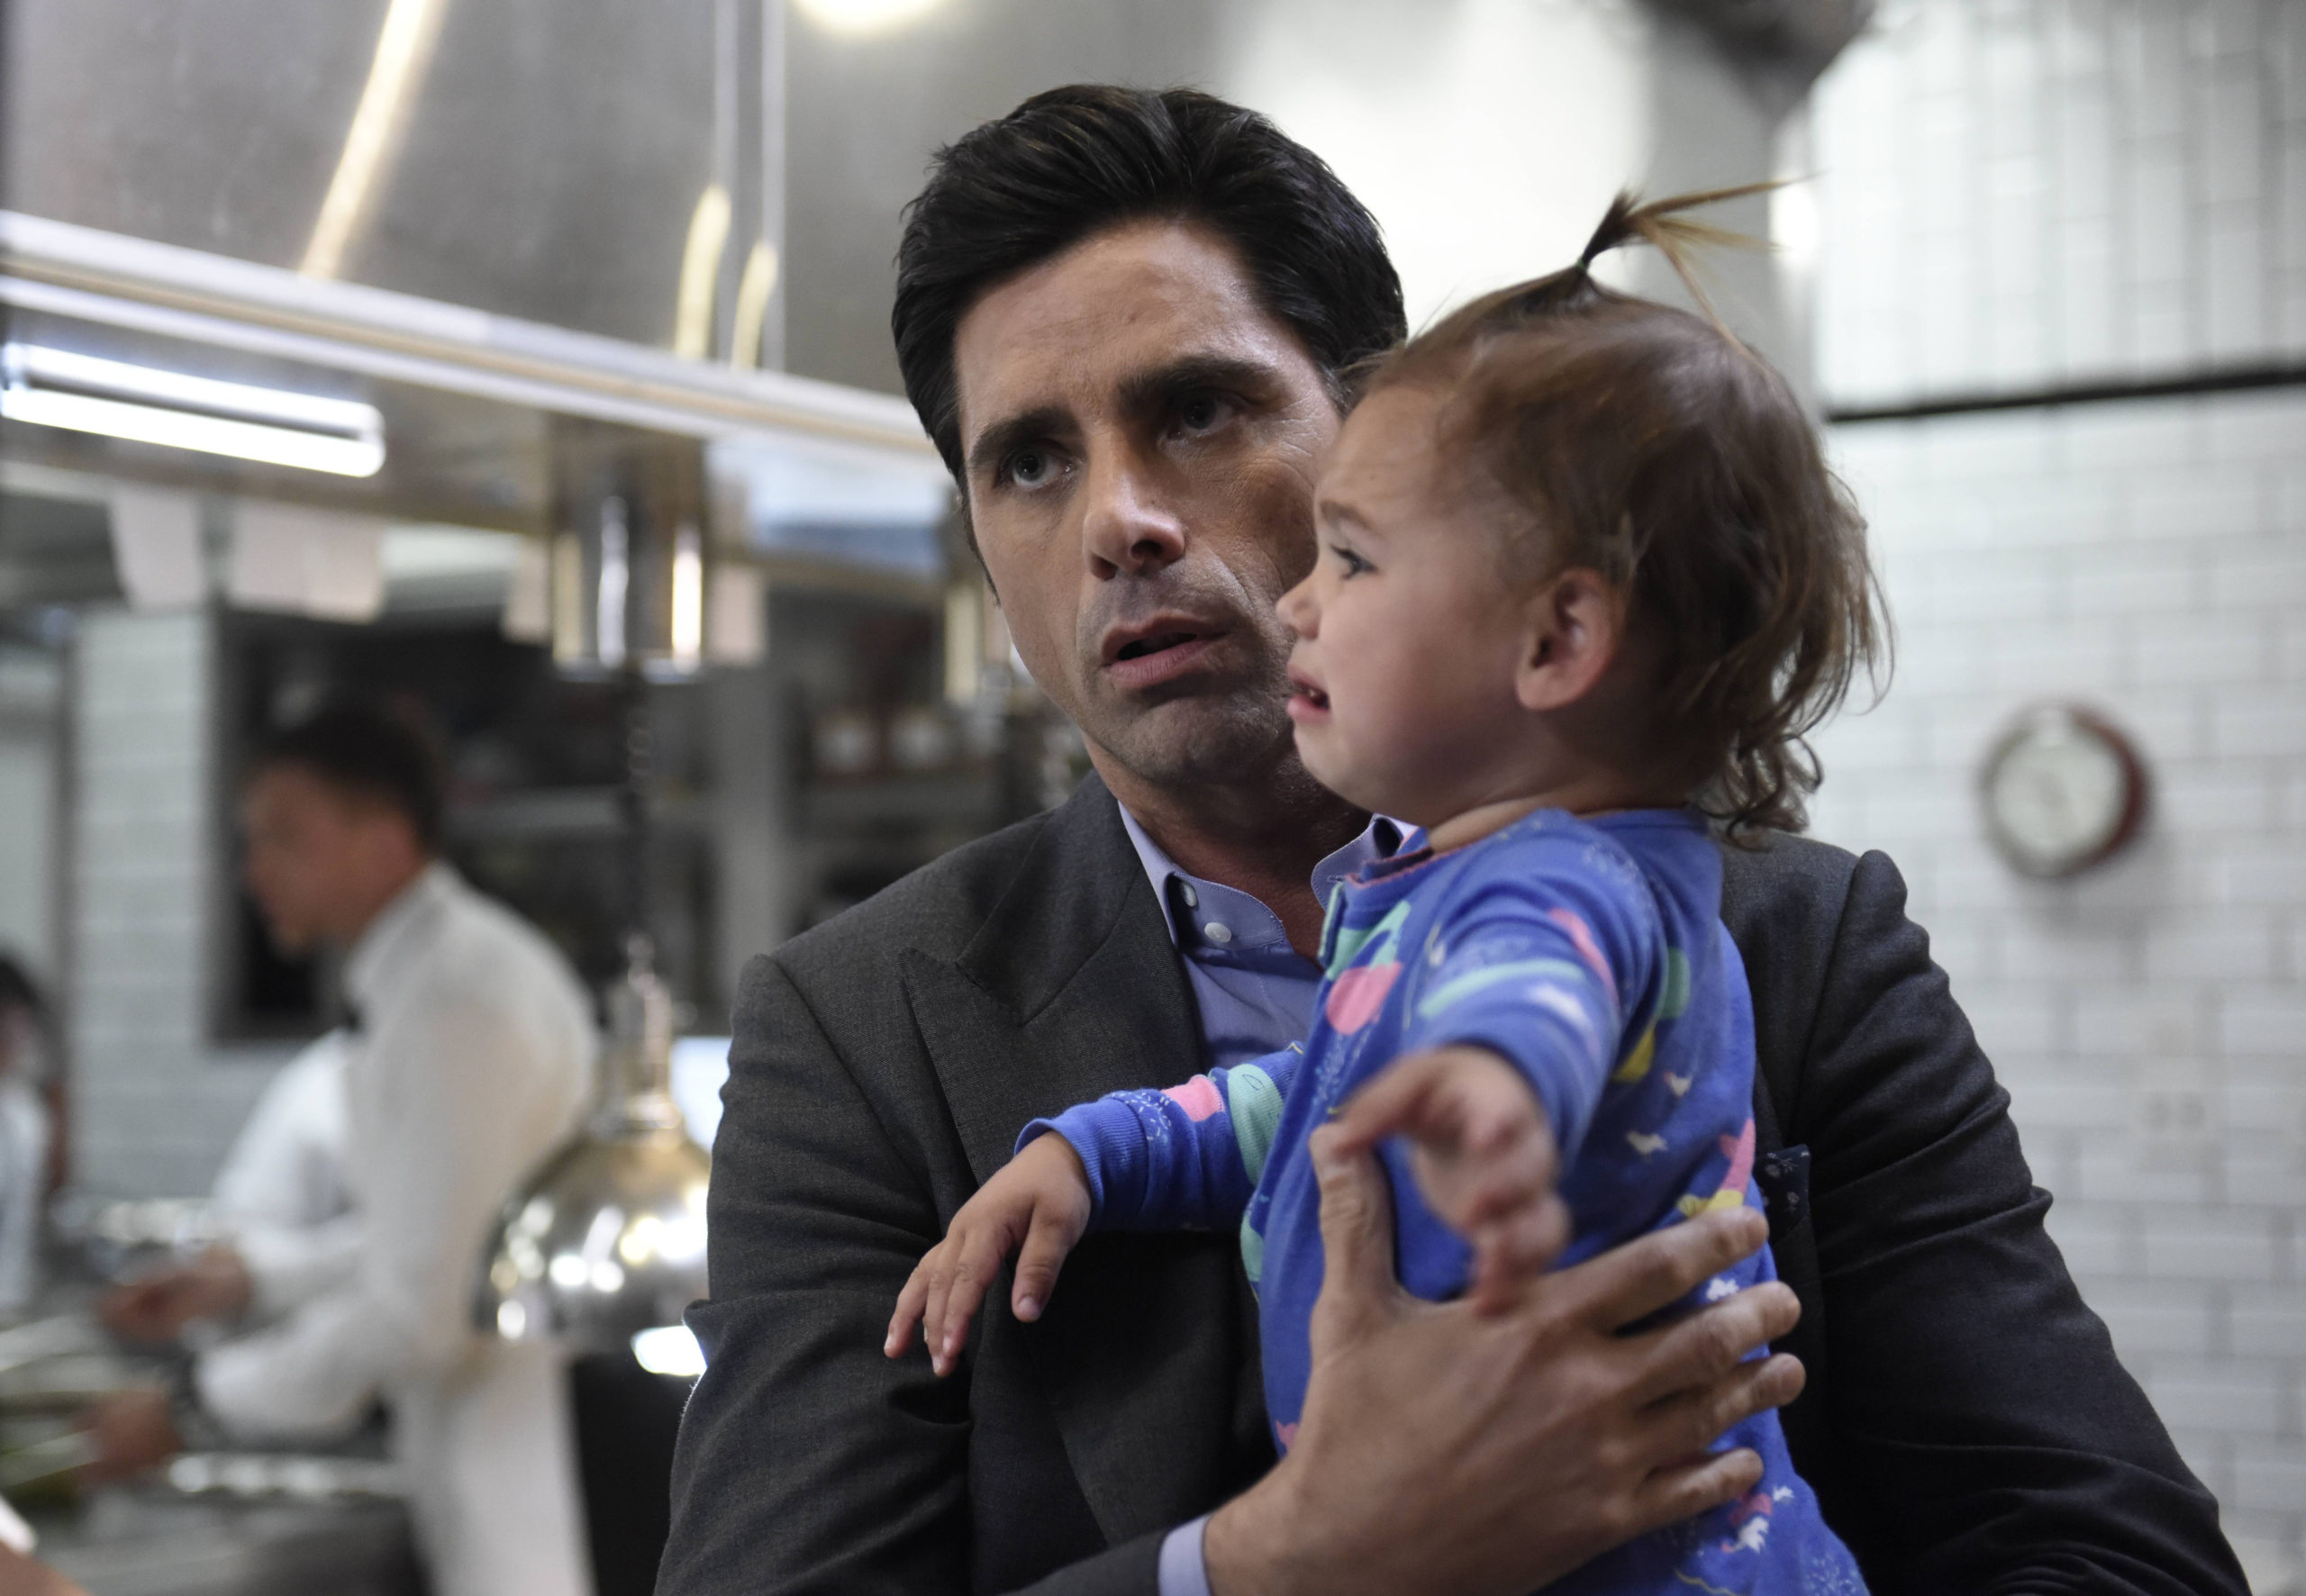 John Stamos as Jimmy with Edie in Grandfathered